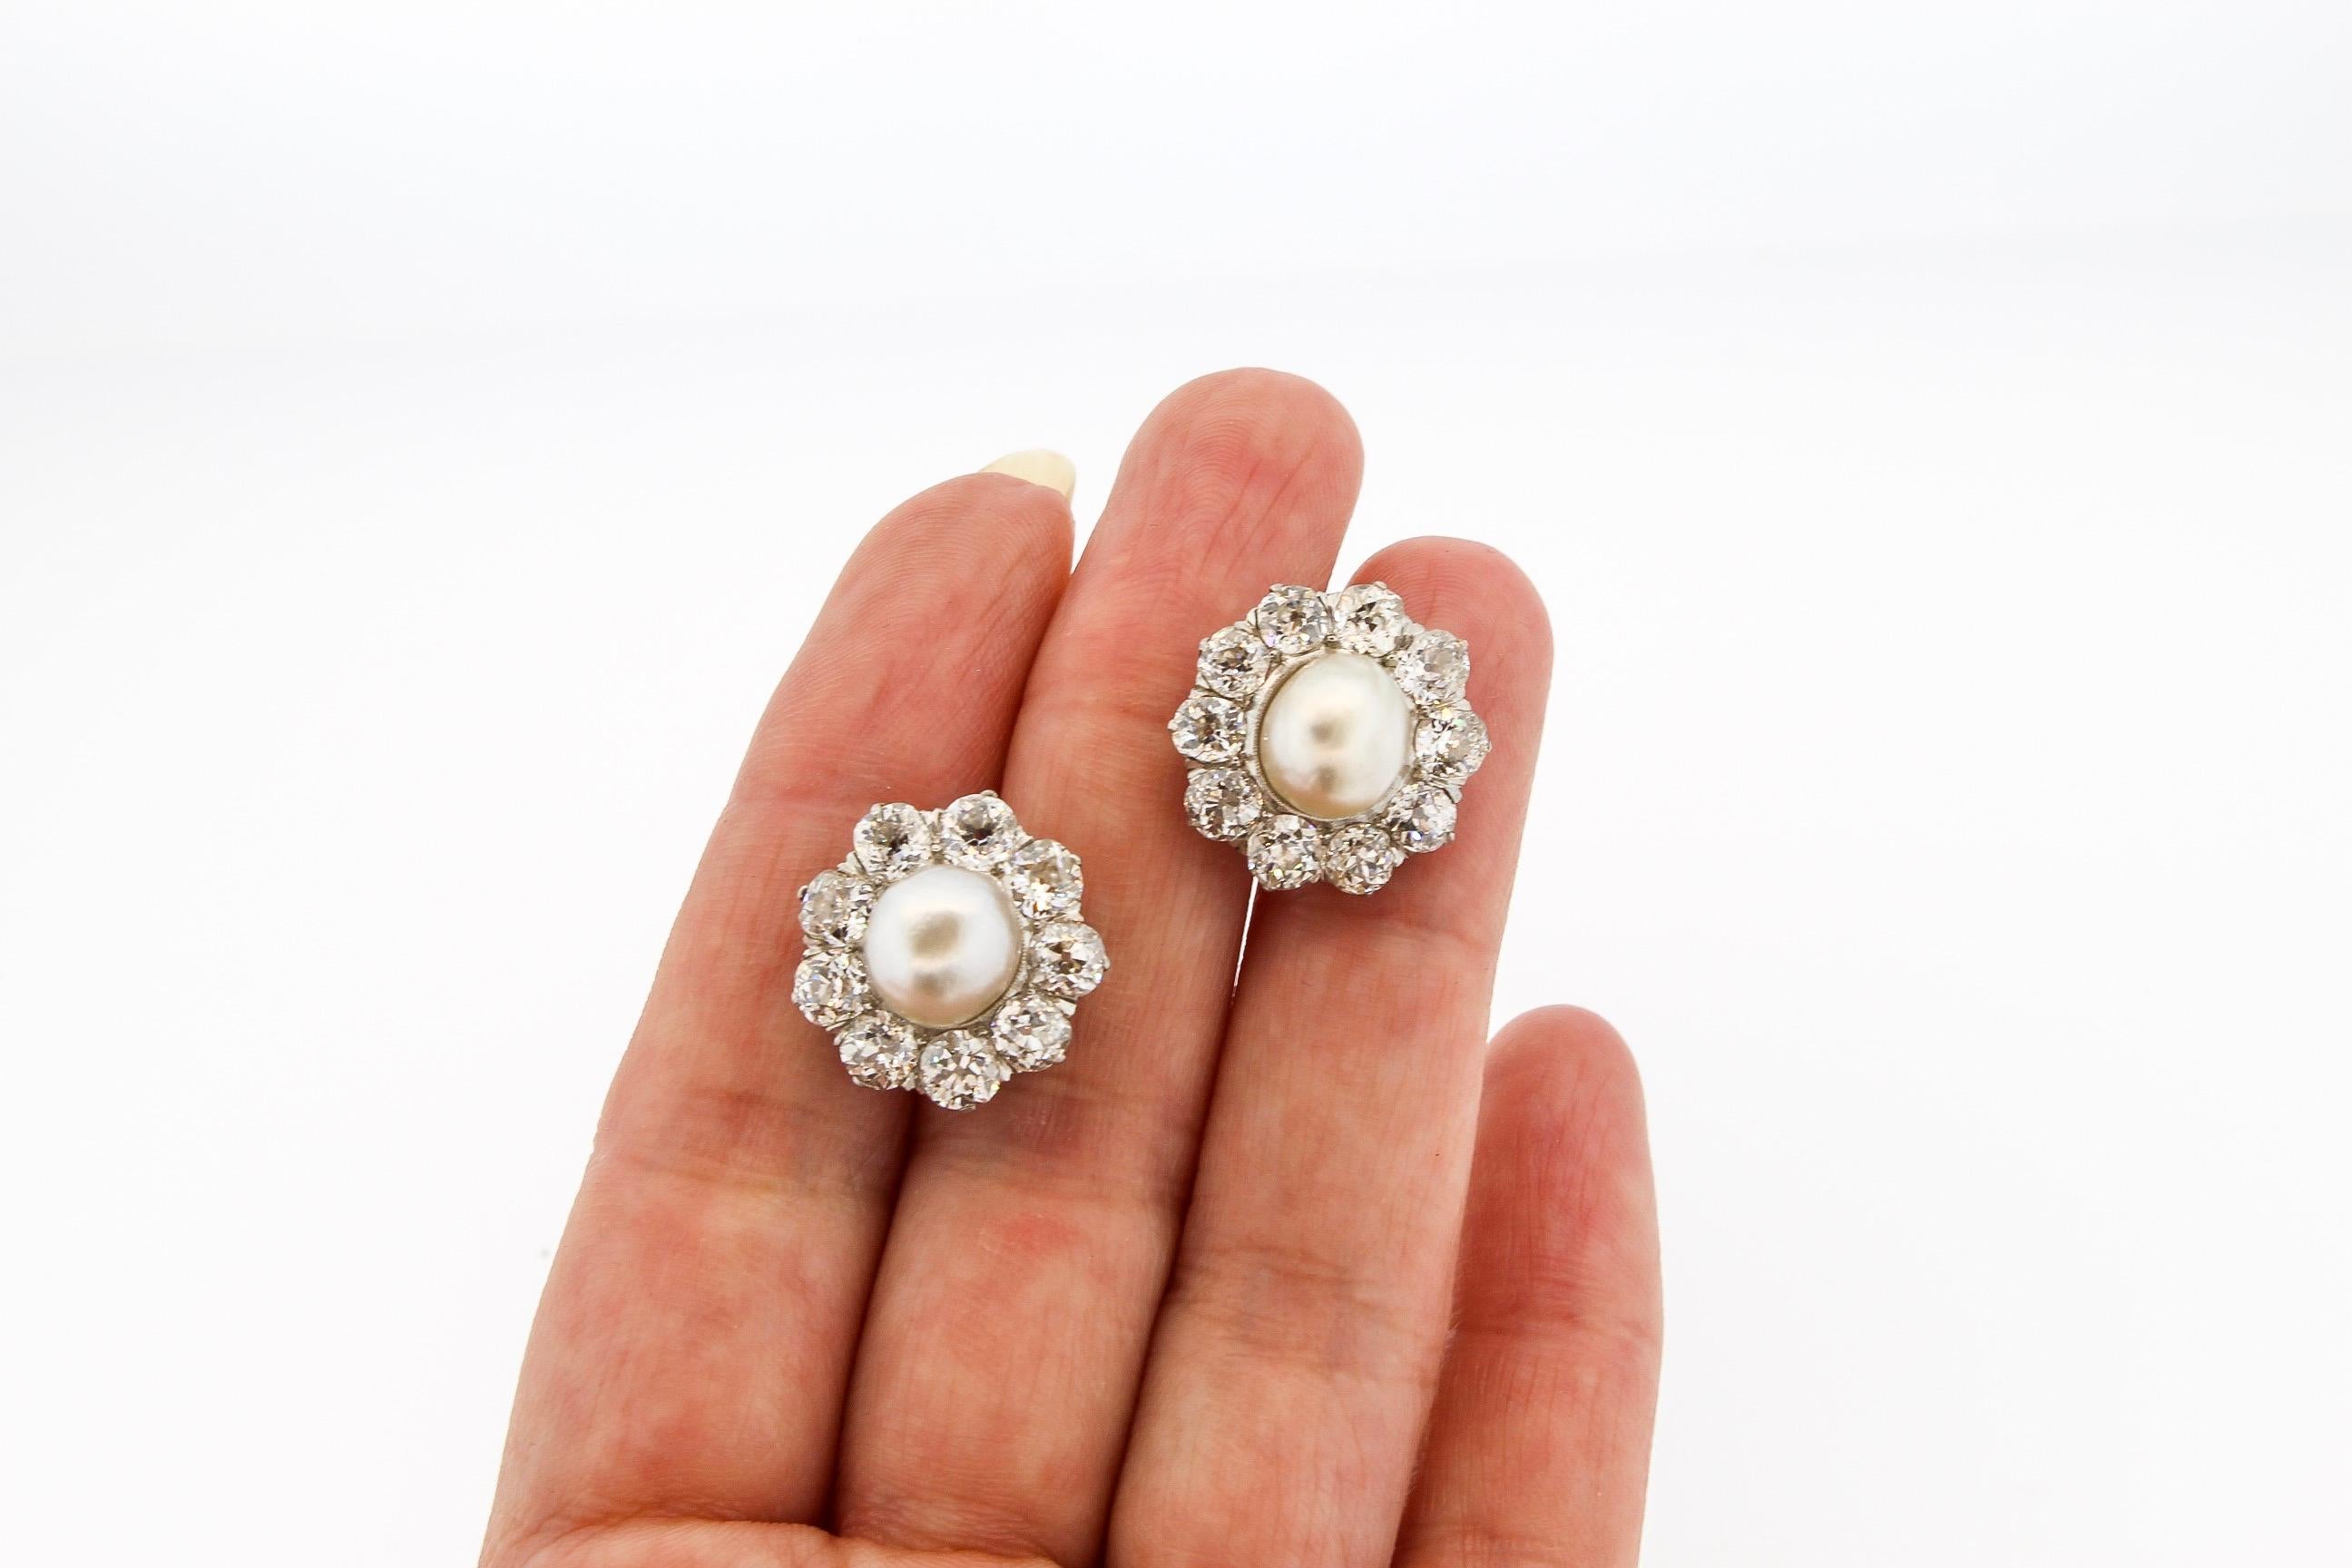 A fabulous pair of platinum and 18k gold natural pearl and old mine diamond cluster earrings. The creamy lustrous natural pearls are surrounded by chunky old mine cut diamonds. The earrings are set with 20 old cut diamonds weighing approximately 6